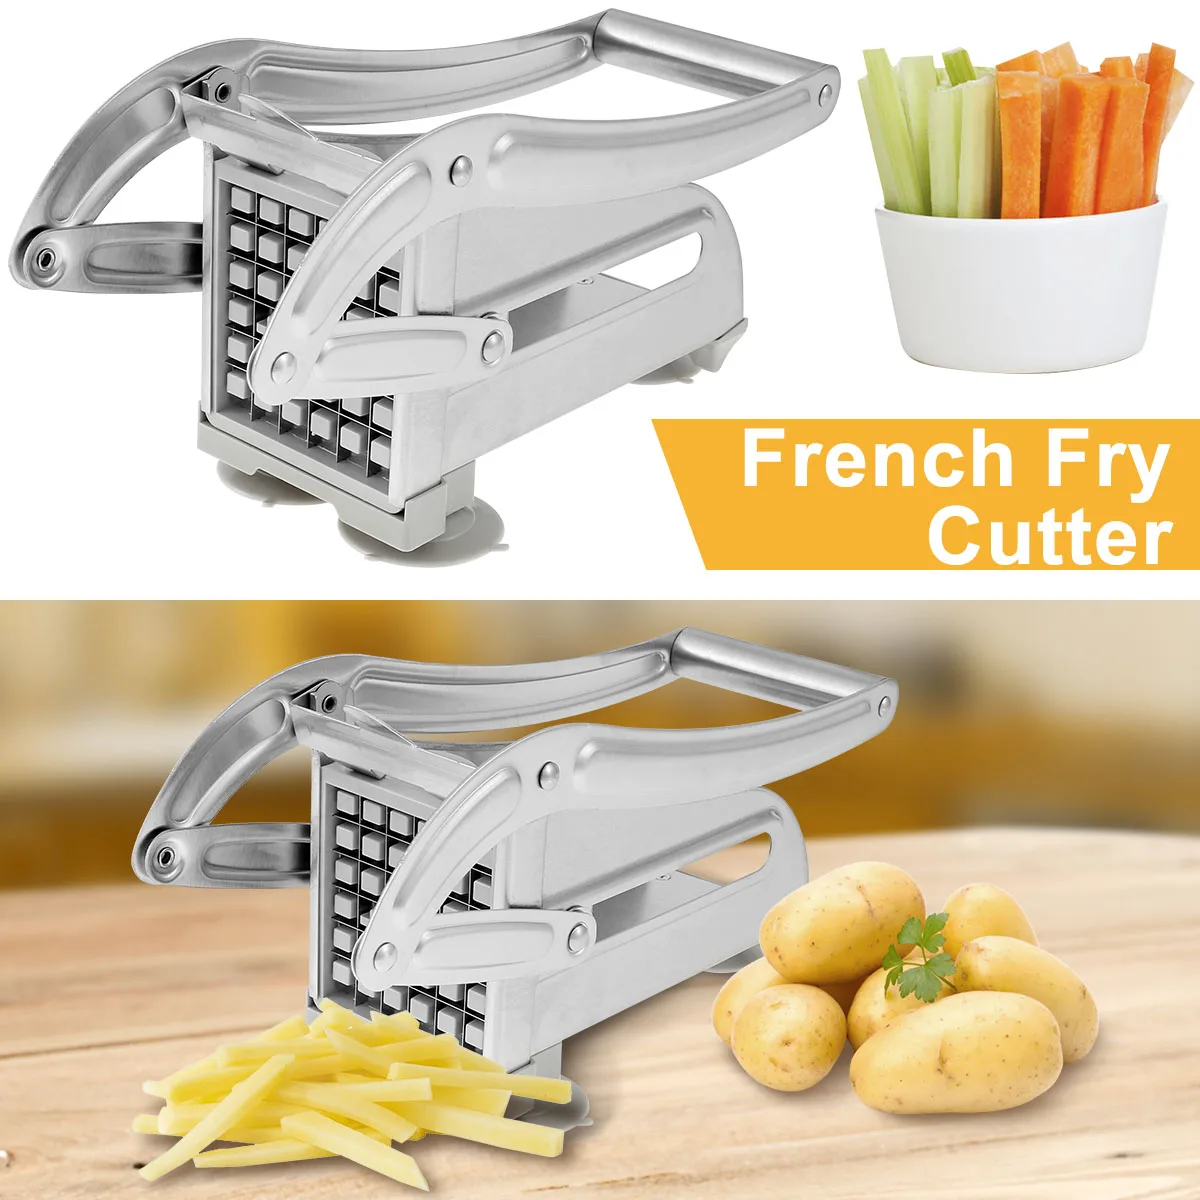 OEM French Fry Cutter Stainless Steel Potato Slicer Manual Vegetable Cutter Potato Chips Maker French Fries Cutter Kitchen Tools